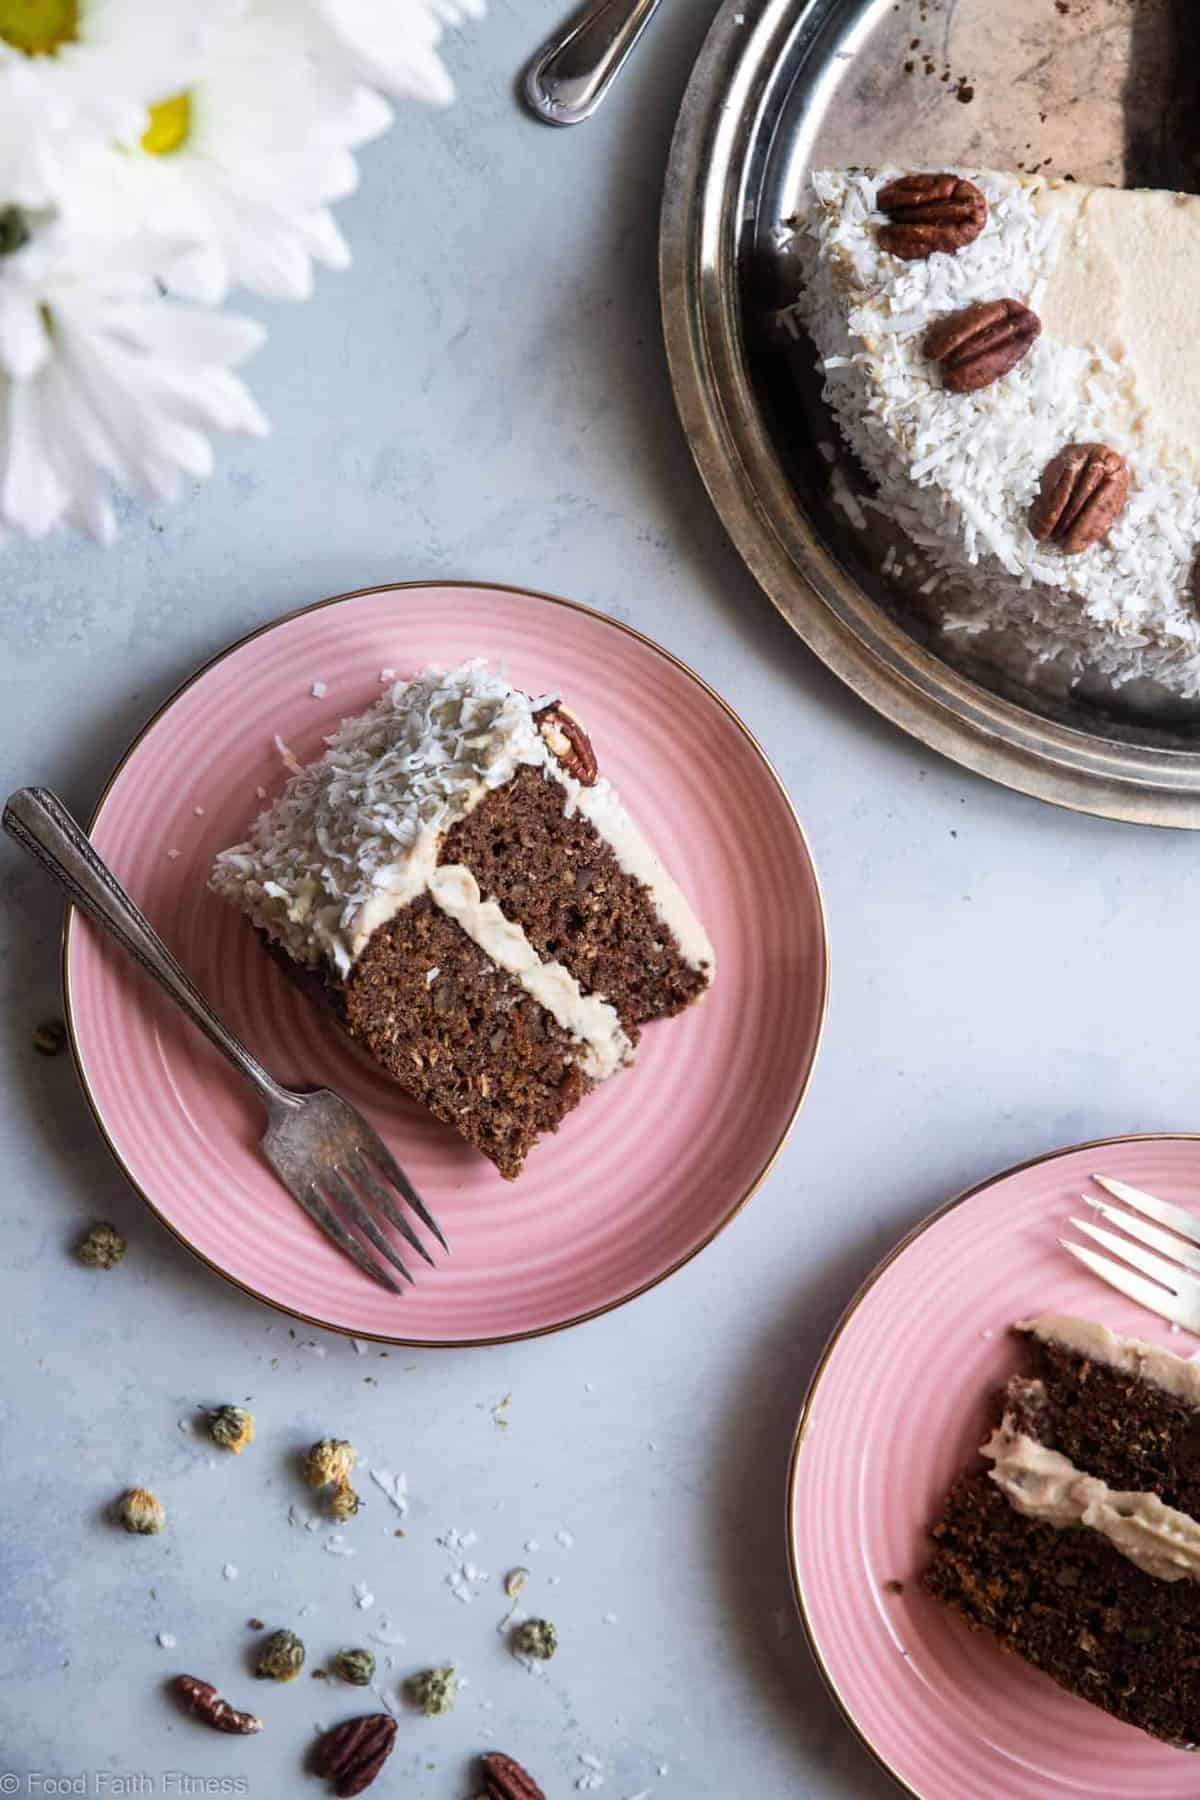 Gluten Free Carrot Cake - This dairy, grain and gluten free, Paleo Carrot Cake has a luscious cashew "cream cheese" frosting and is easy to make! Always a hit with a crowd! | #Foodfaithfitness | 